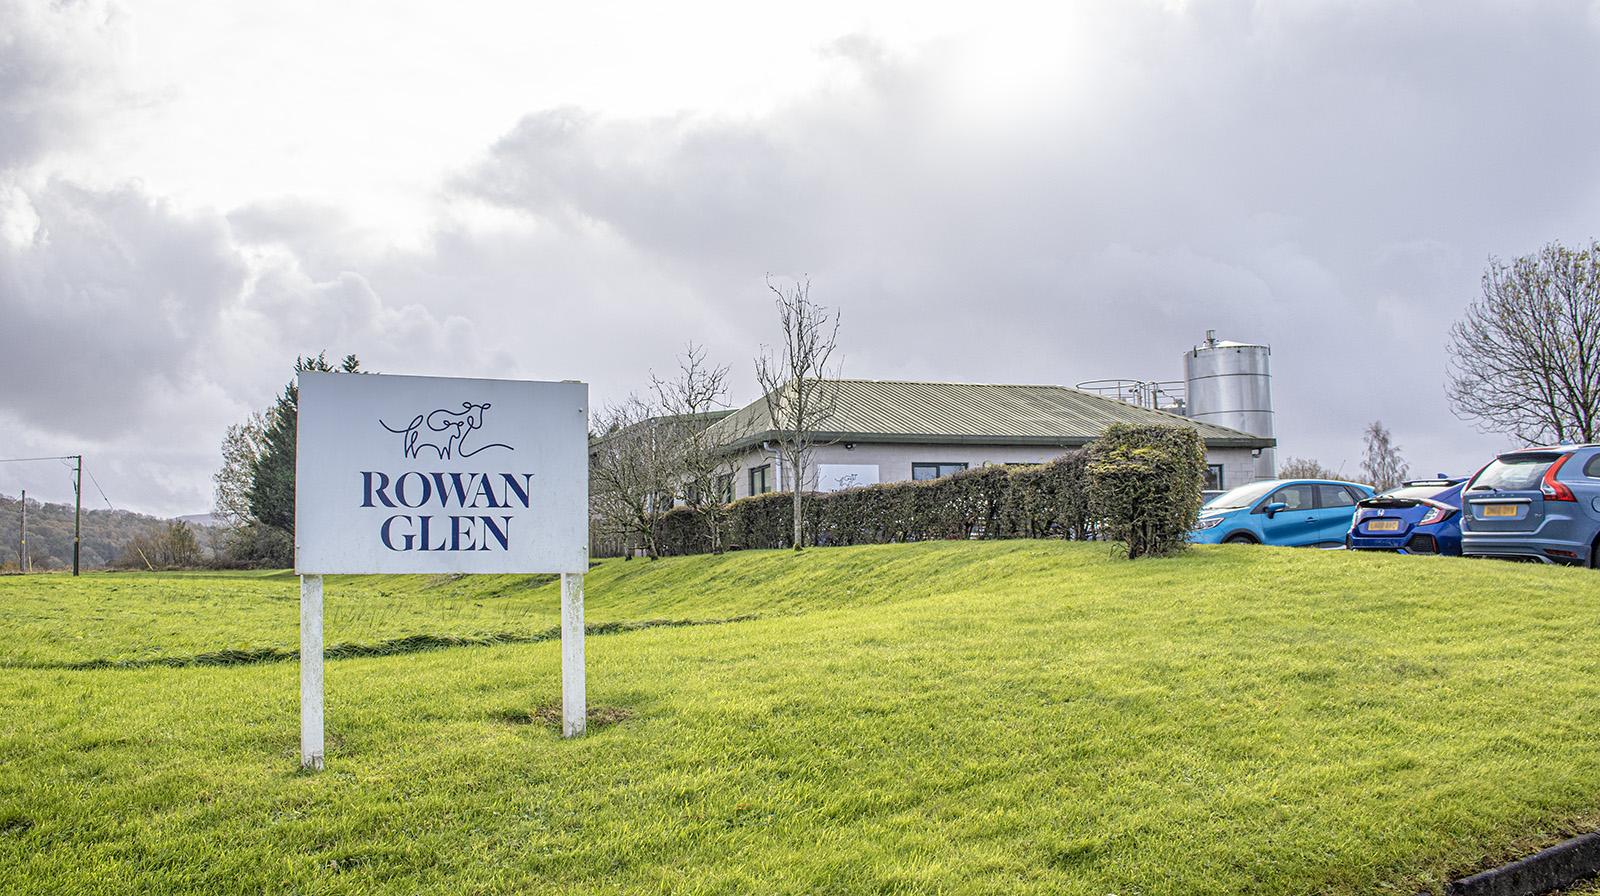 Sign with Rowan Glen logo in front of their dairy factory in the Dumfries & Galloway countryside.